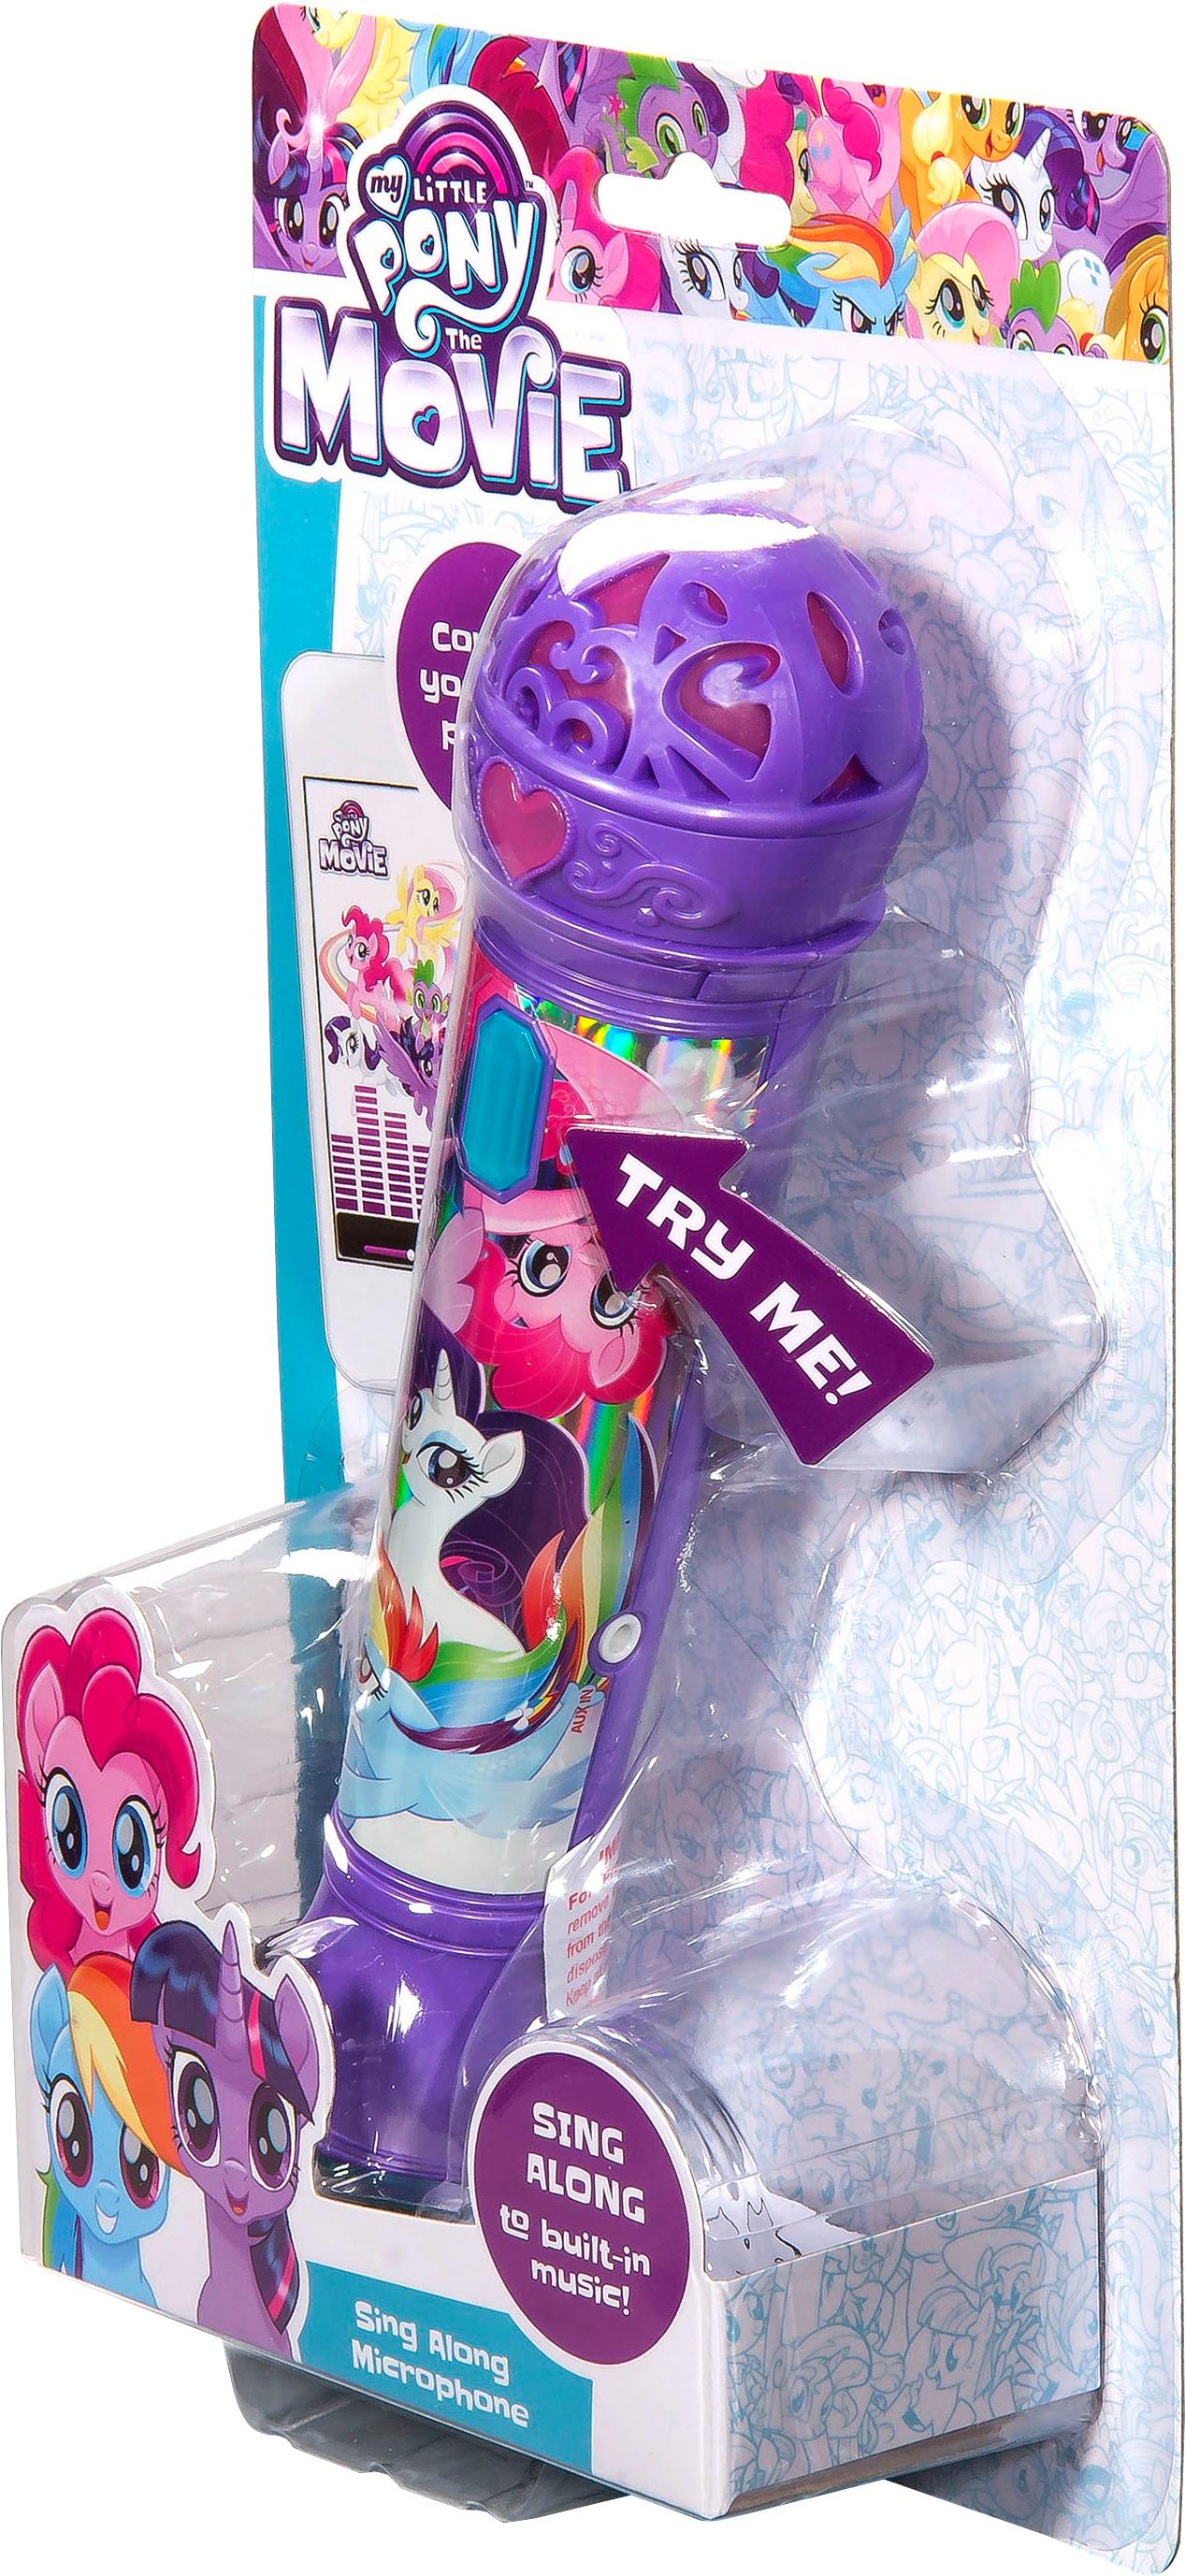 Song Along To Build In Music Microphone My Little Pony 